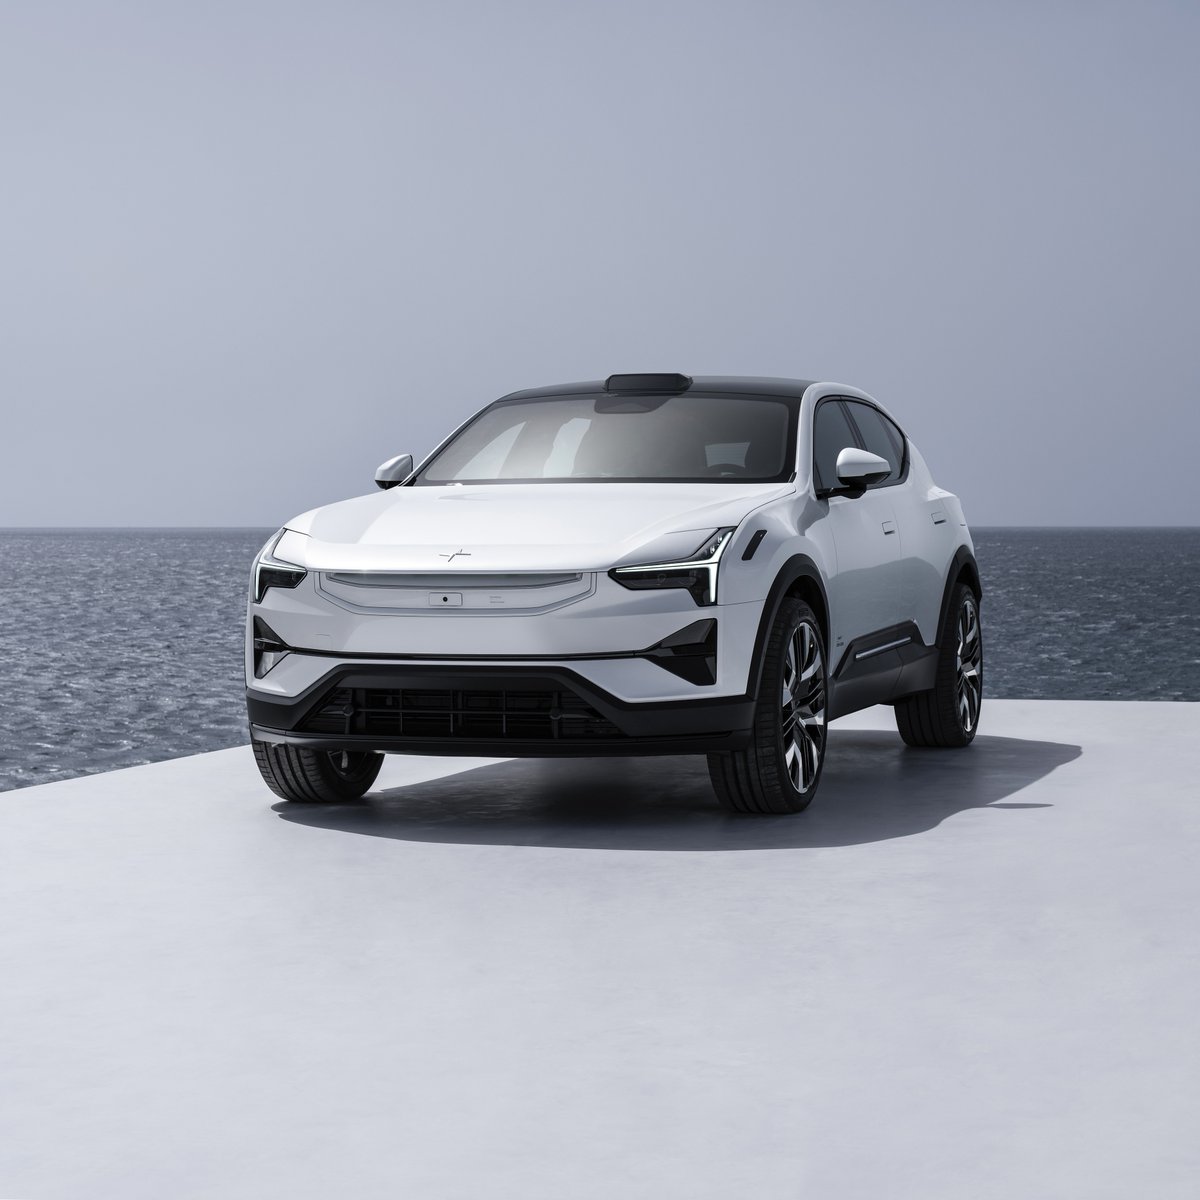 Our partner @PolestarCars is expanding plans for $LAZR #lidar to include the new #polestar5, and pre-orders for this beautiful #polestar3 with Luminar ⬇️ open today! bit.ly/PolestarExpans…